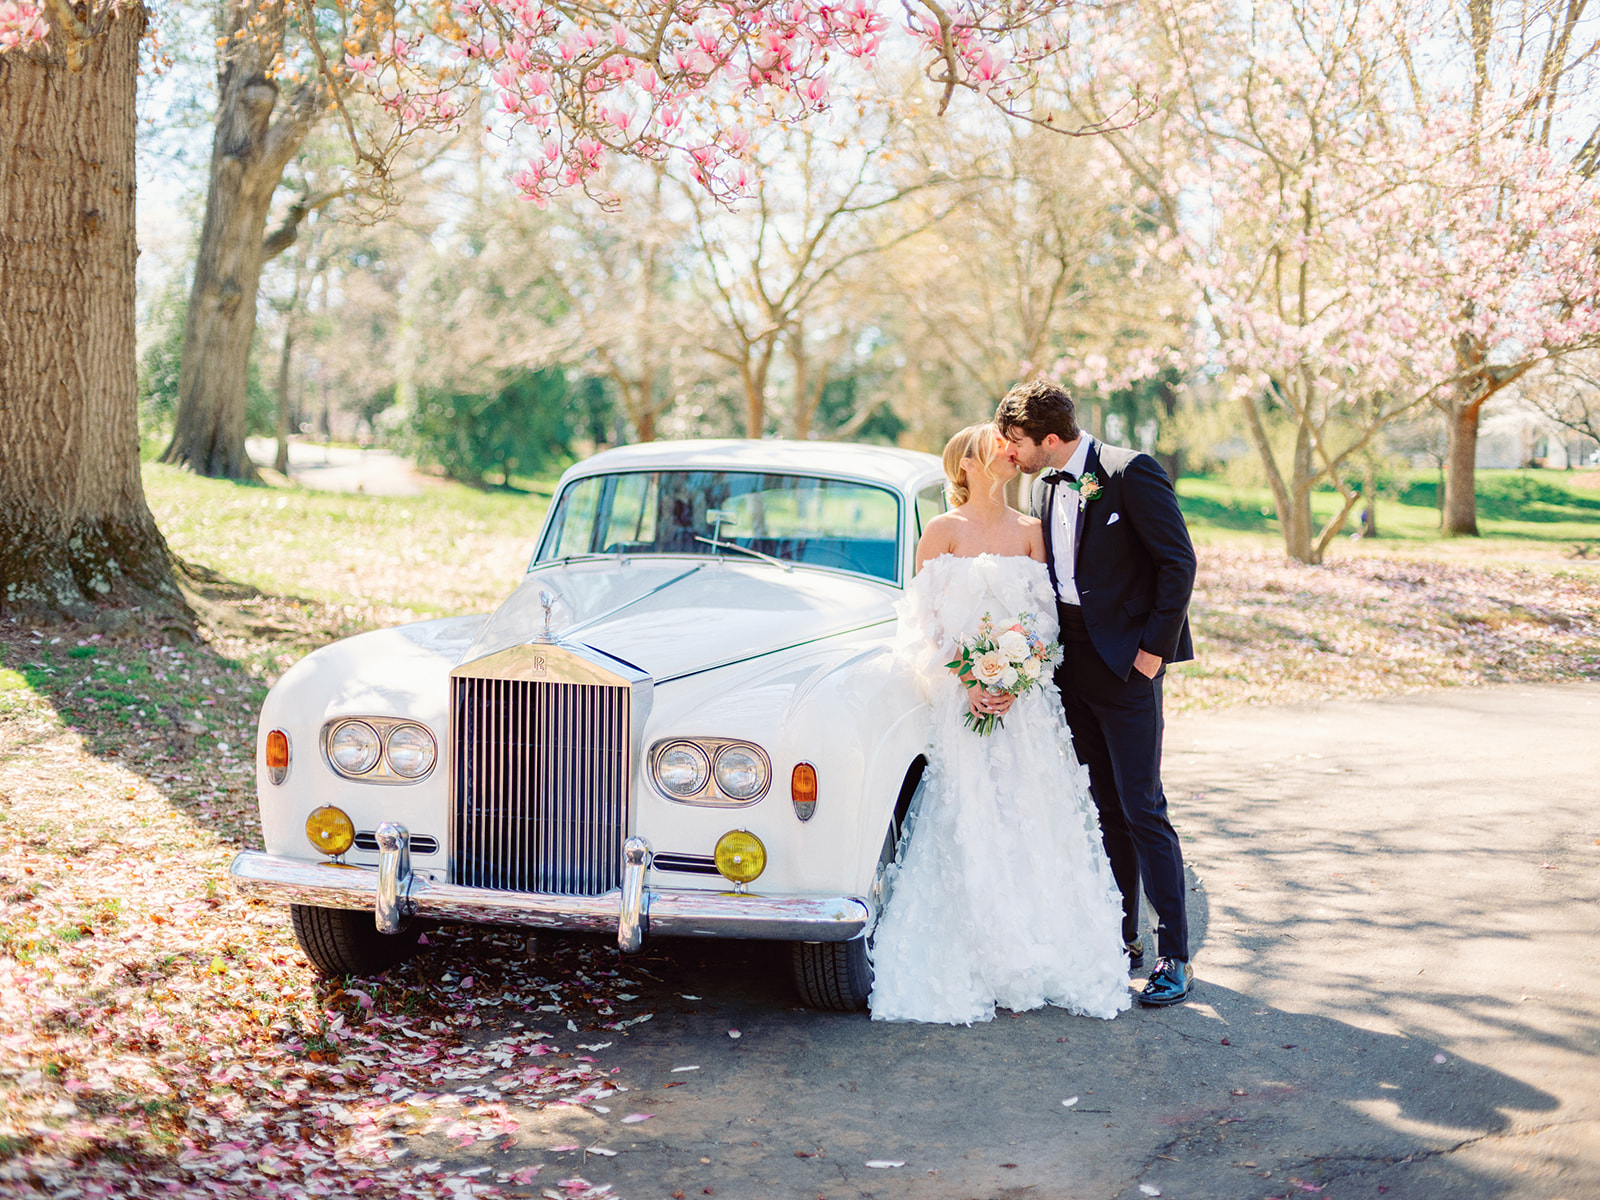 Trendy couple kissing in front of classic Rolls-royce car